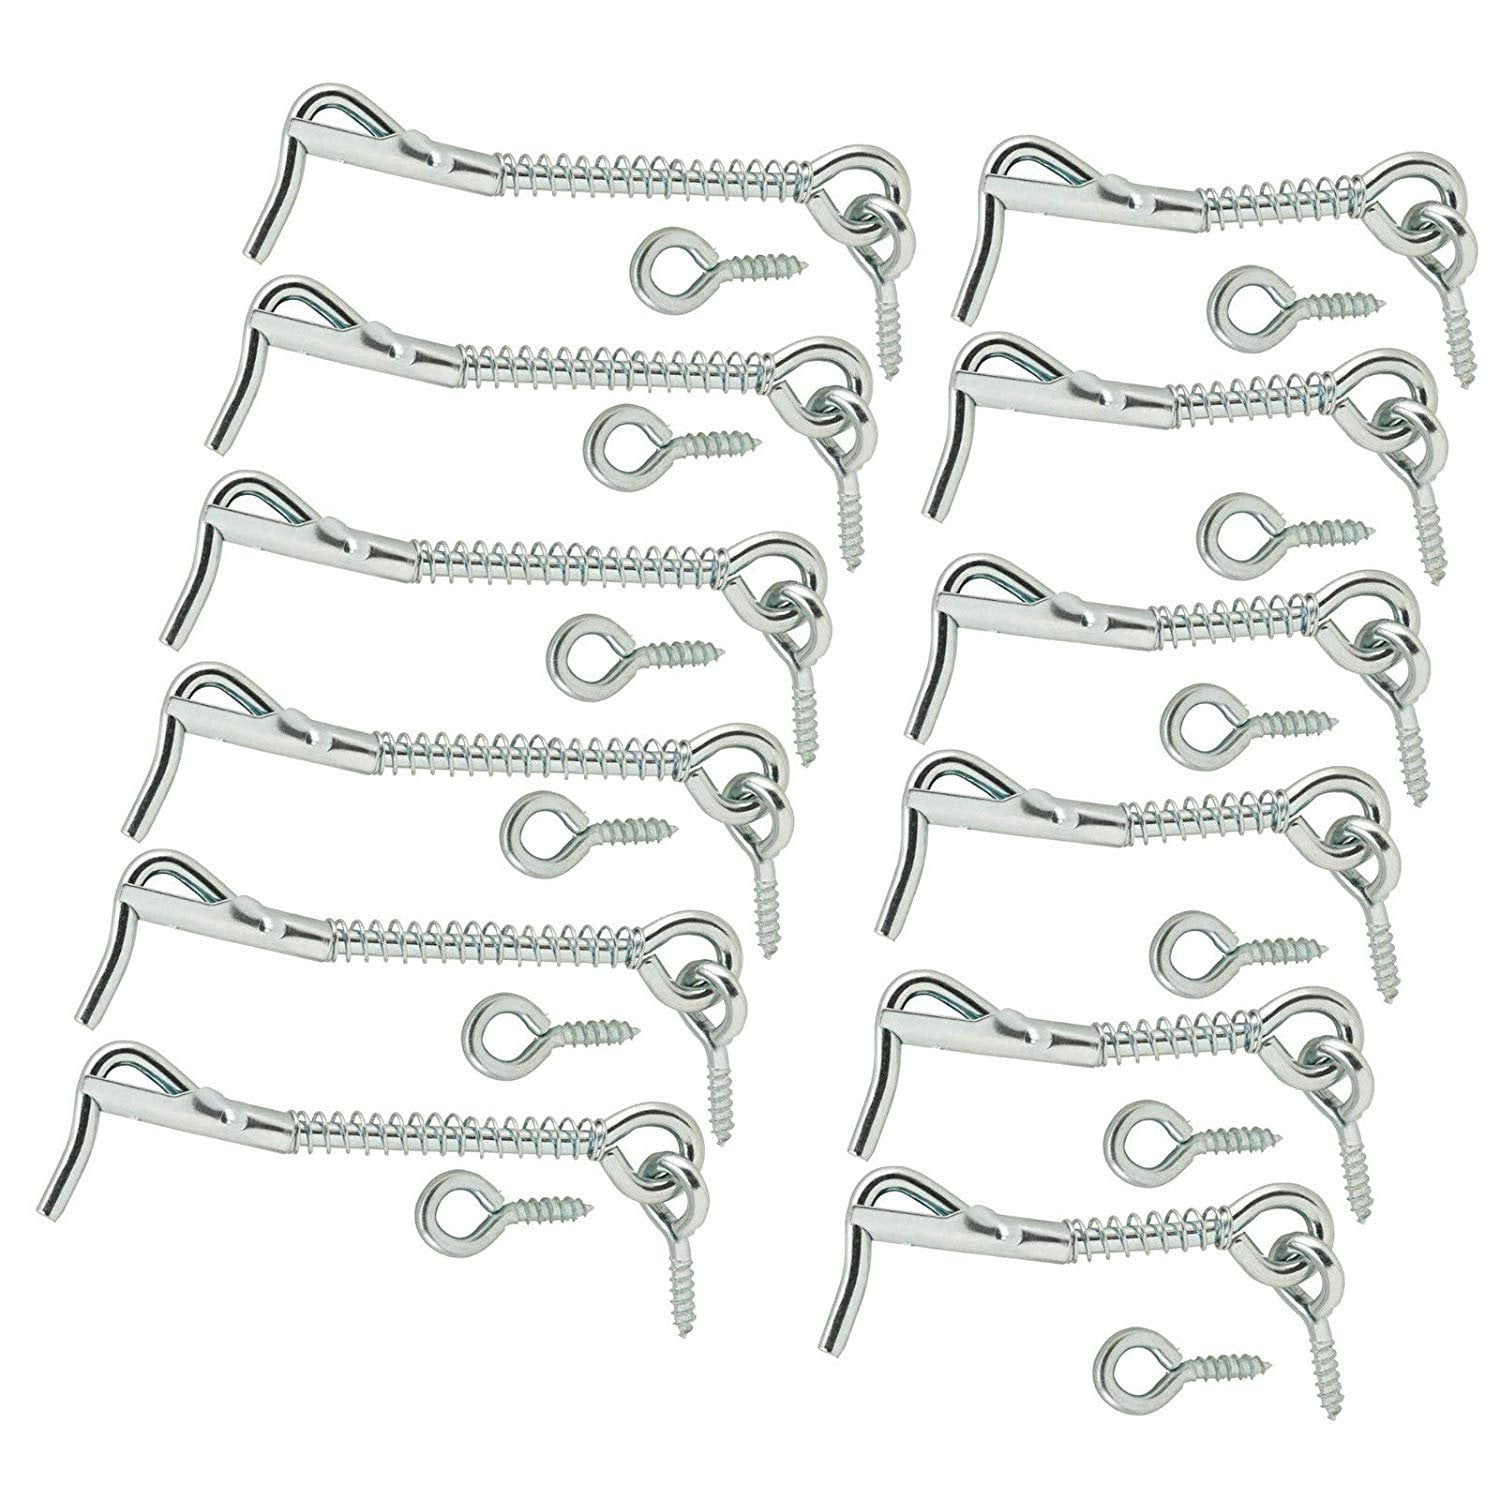 Wideskall Zinc Plated Wire Gate Hook and Eye Latch with Spring Lock Pack of  12 